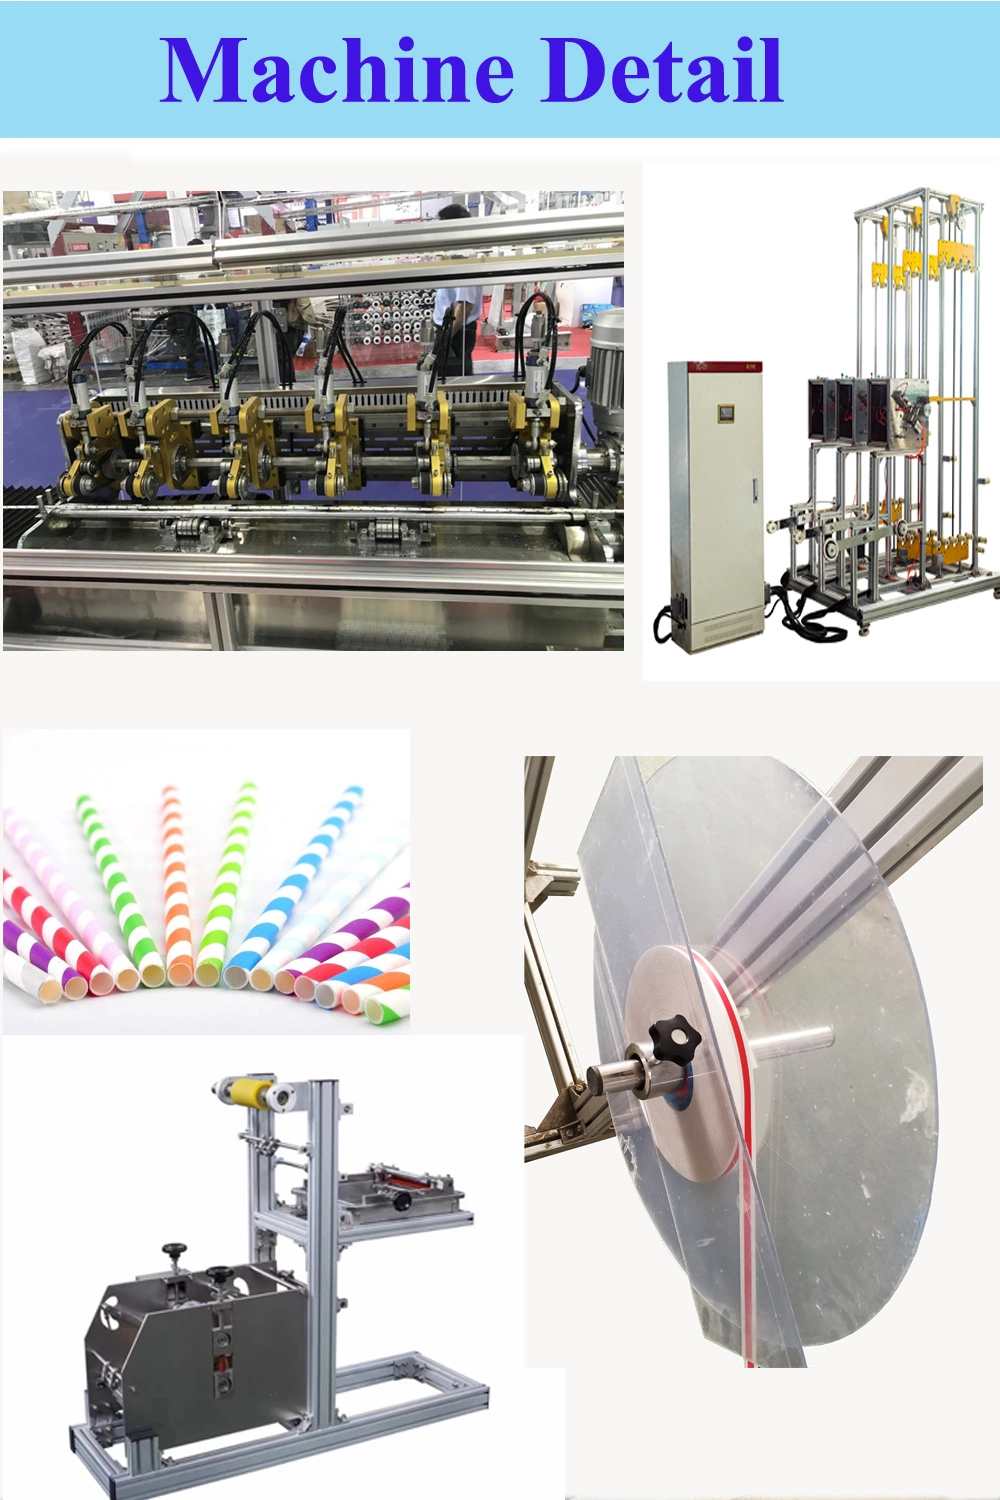 Stainless Steel Fully Automatic Environmental Biodegradable Paper Straw Making Machine with 6 Knife